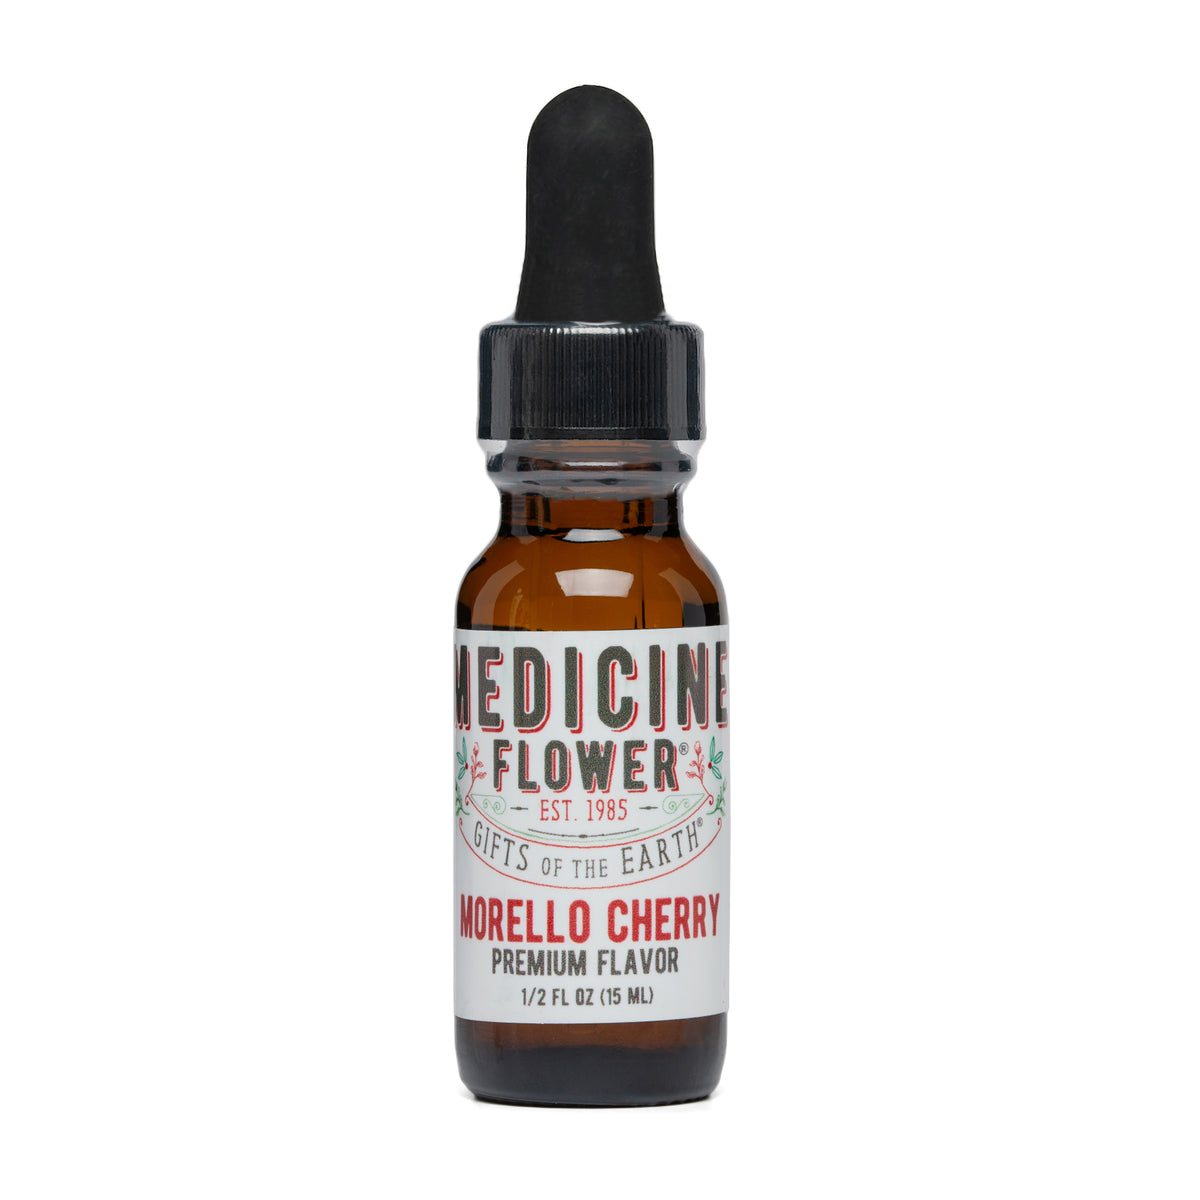 Morello Cherry Flavour Premium Extract | Medicine Flower | Raw Living UK | Raw Foods | Medicine Flower Morello Cherry Flavour Premium Extract (1/2oz, 1oz) is pure, potent &amp; natural. Amazing taste, with no alcohol or artificial preservatives.